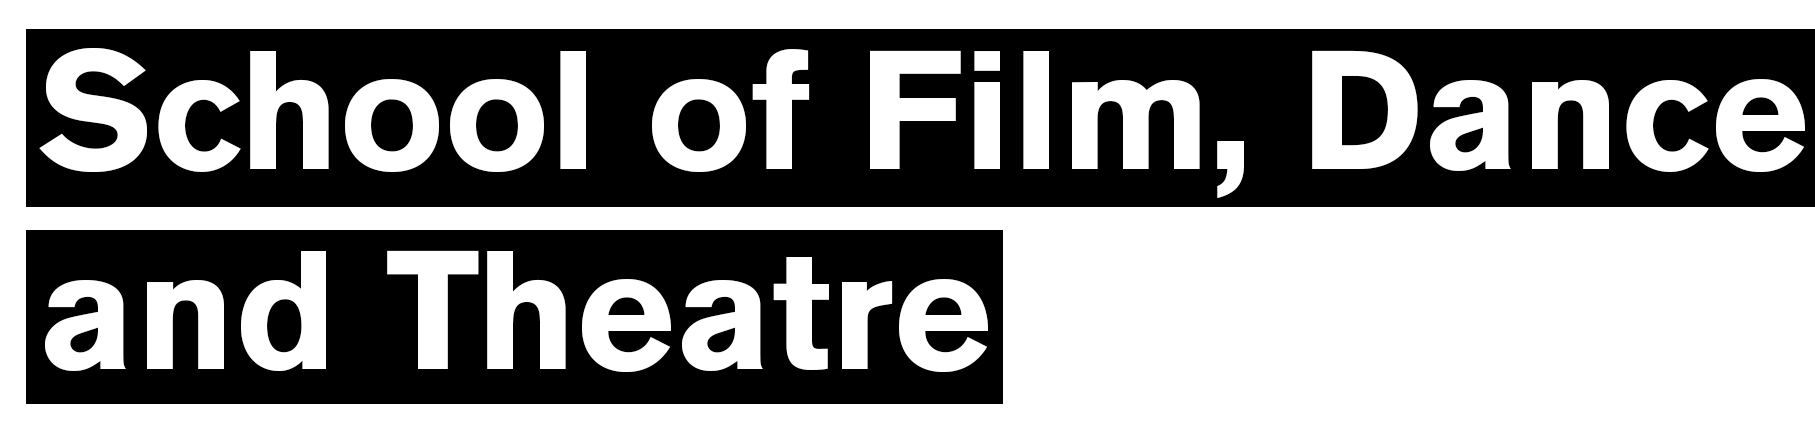 School of Film, Dance and Theatre (text)